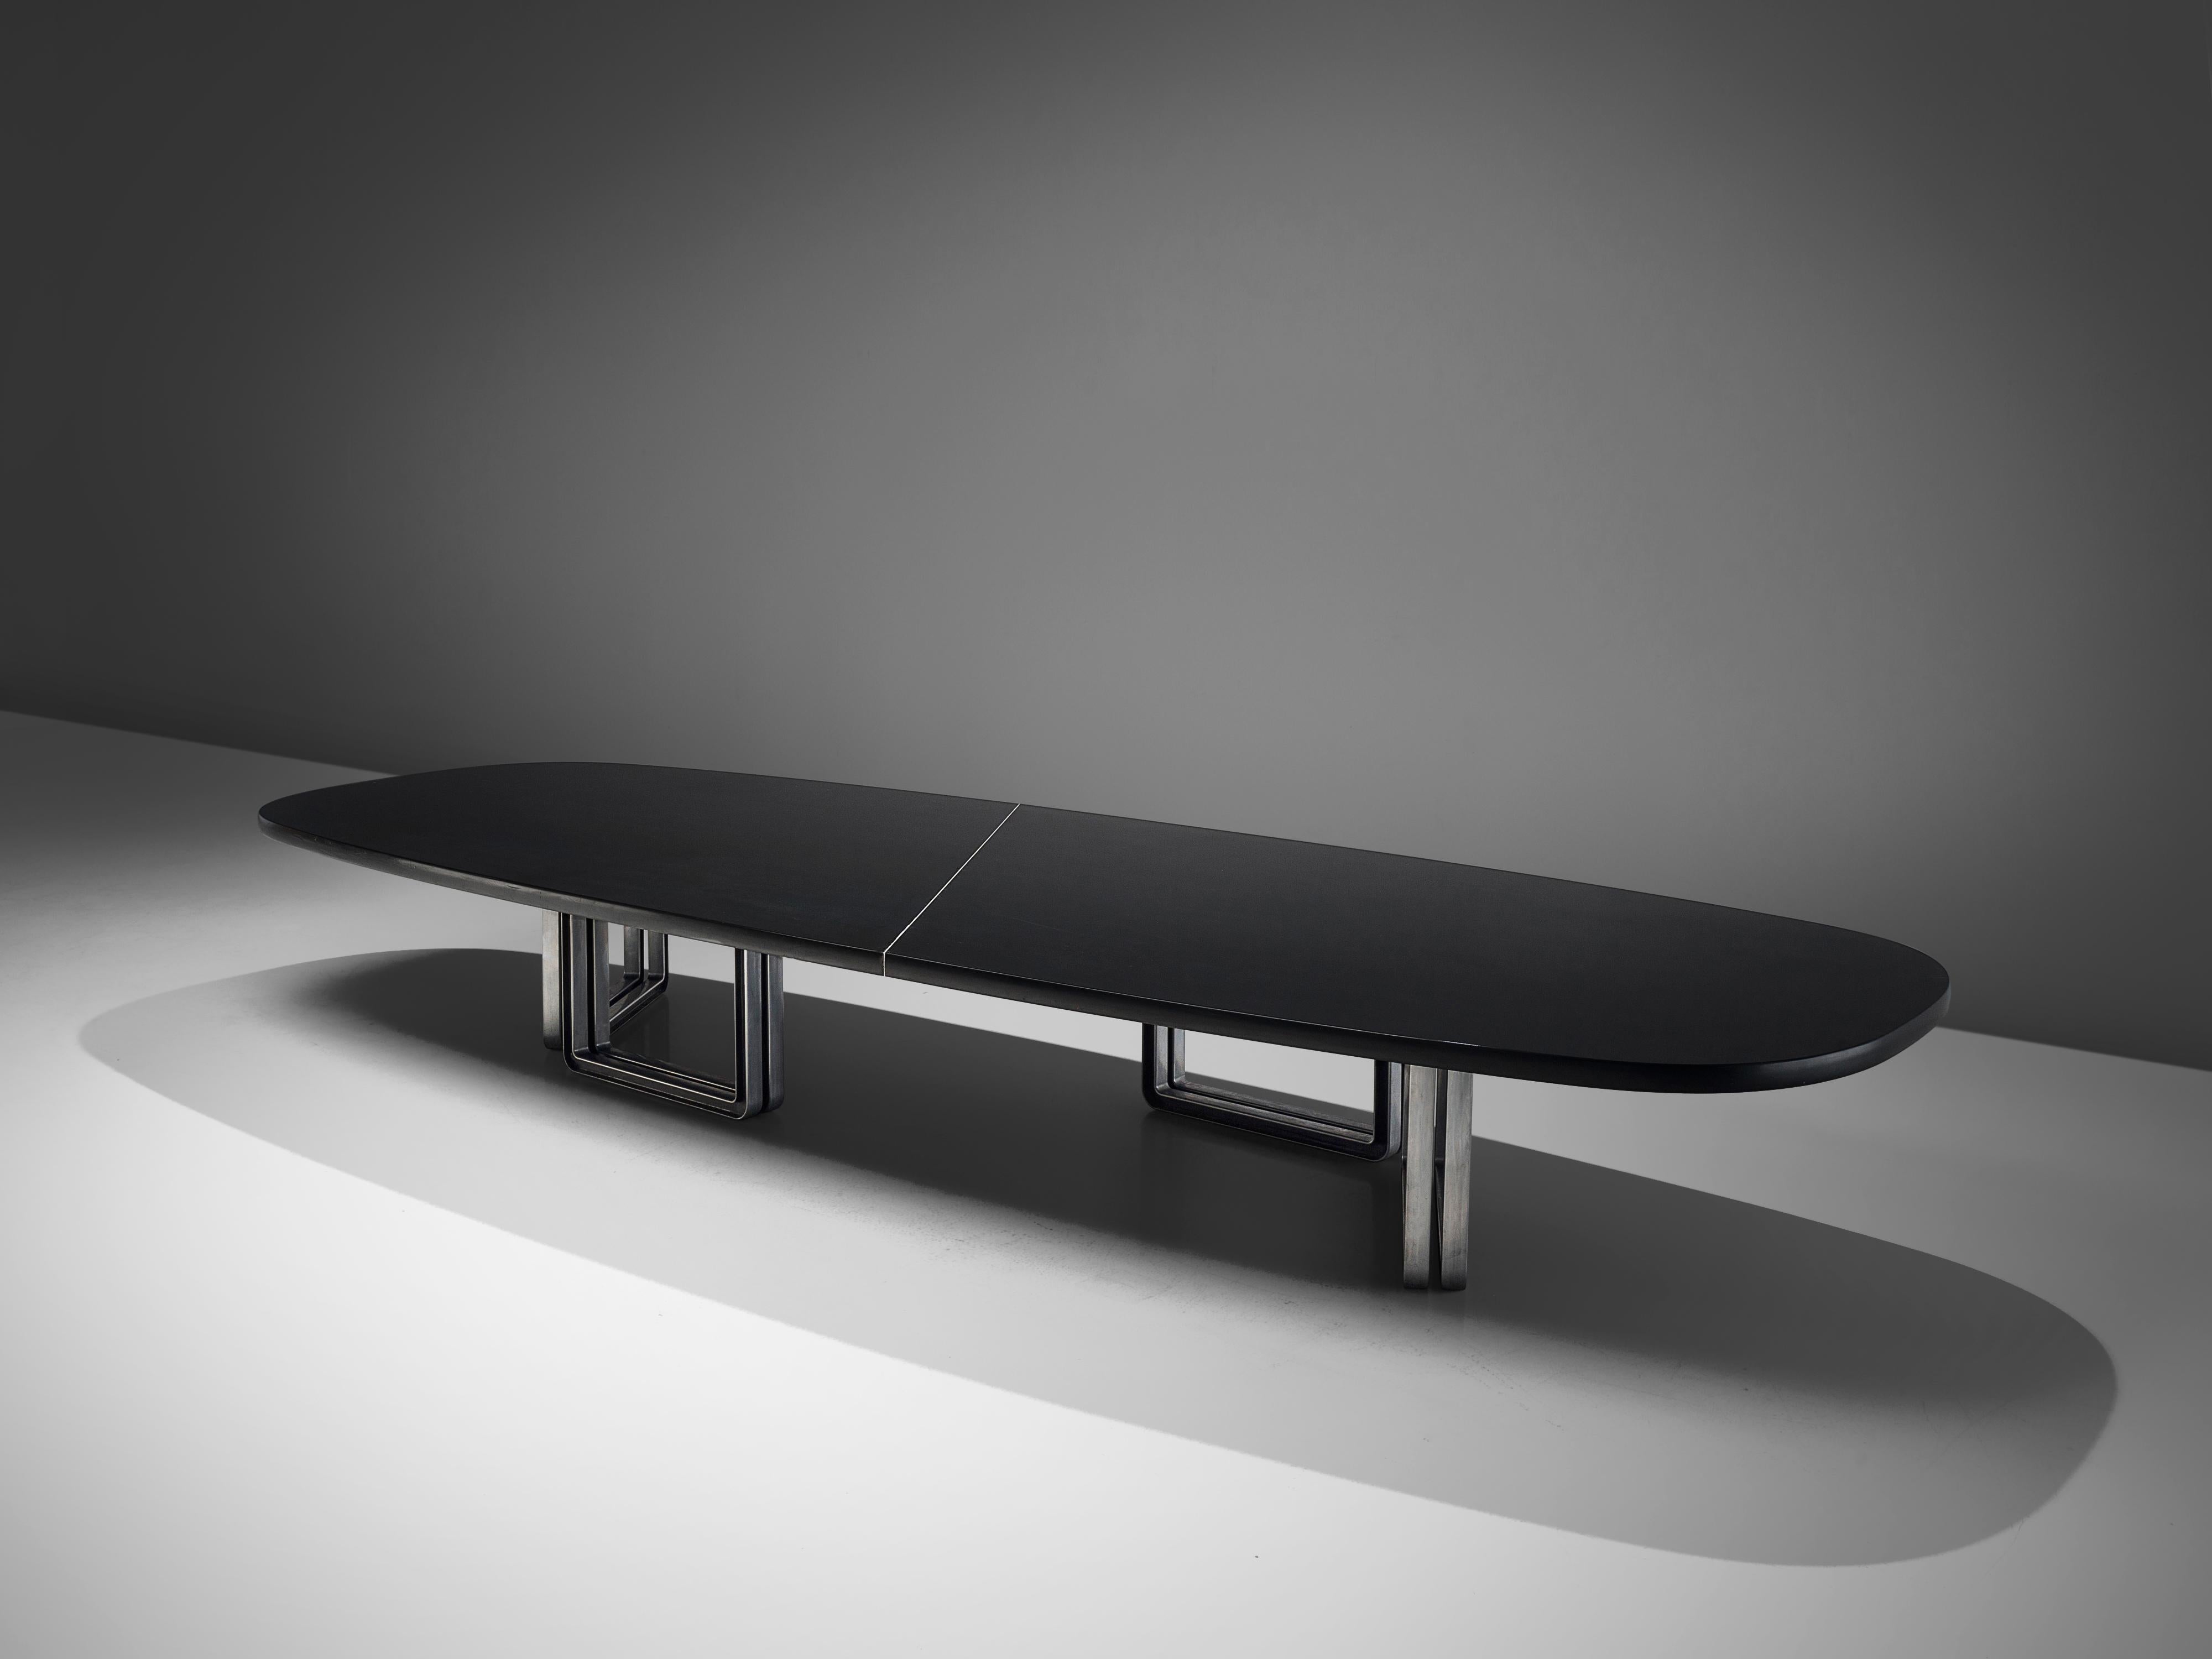 Osvaldo Borsani for Tecno, conference table, lacquered black wood, aluminum base, Italy, 1970s

Conference table with a black top designed by Osvaldo Borsani. The tabletop is composed of two black pieces connected via an expressive line in white